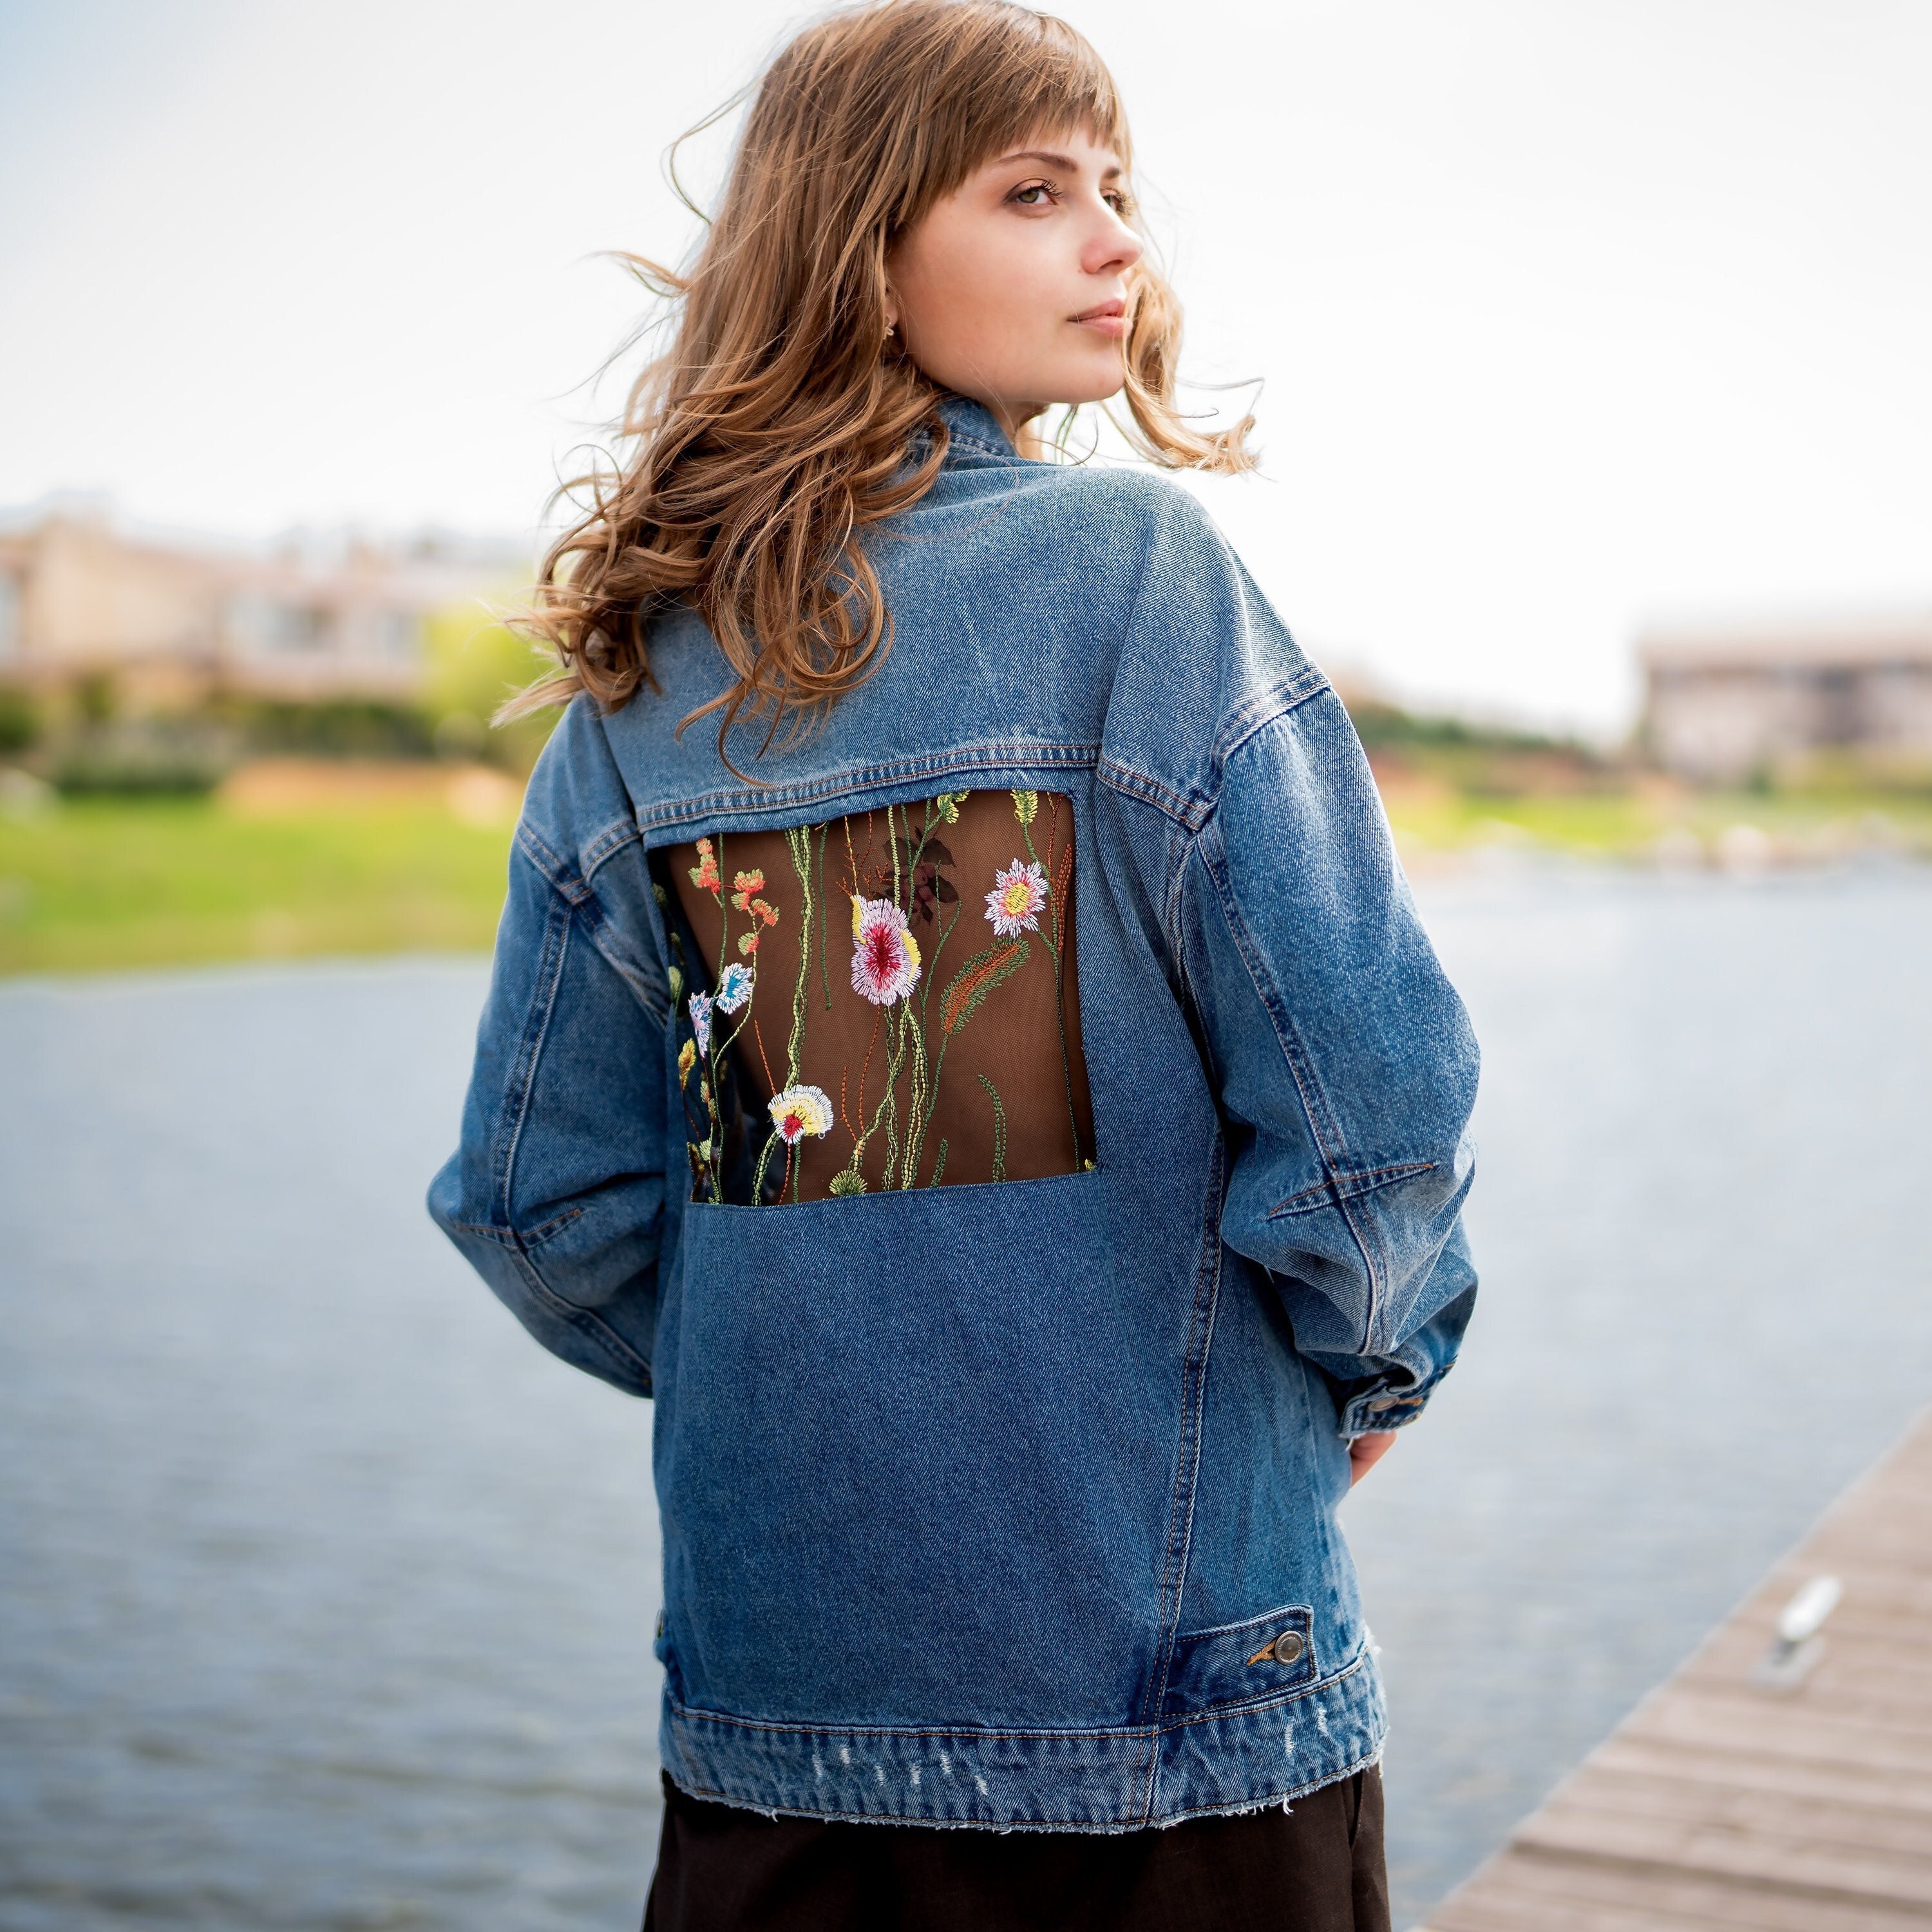 Tulle and denim jacket with floral embroidery